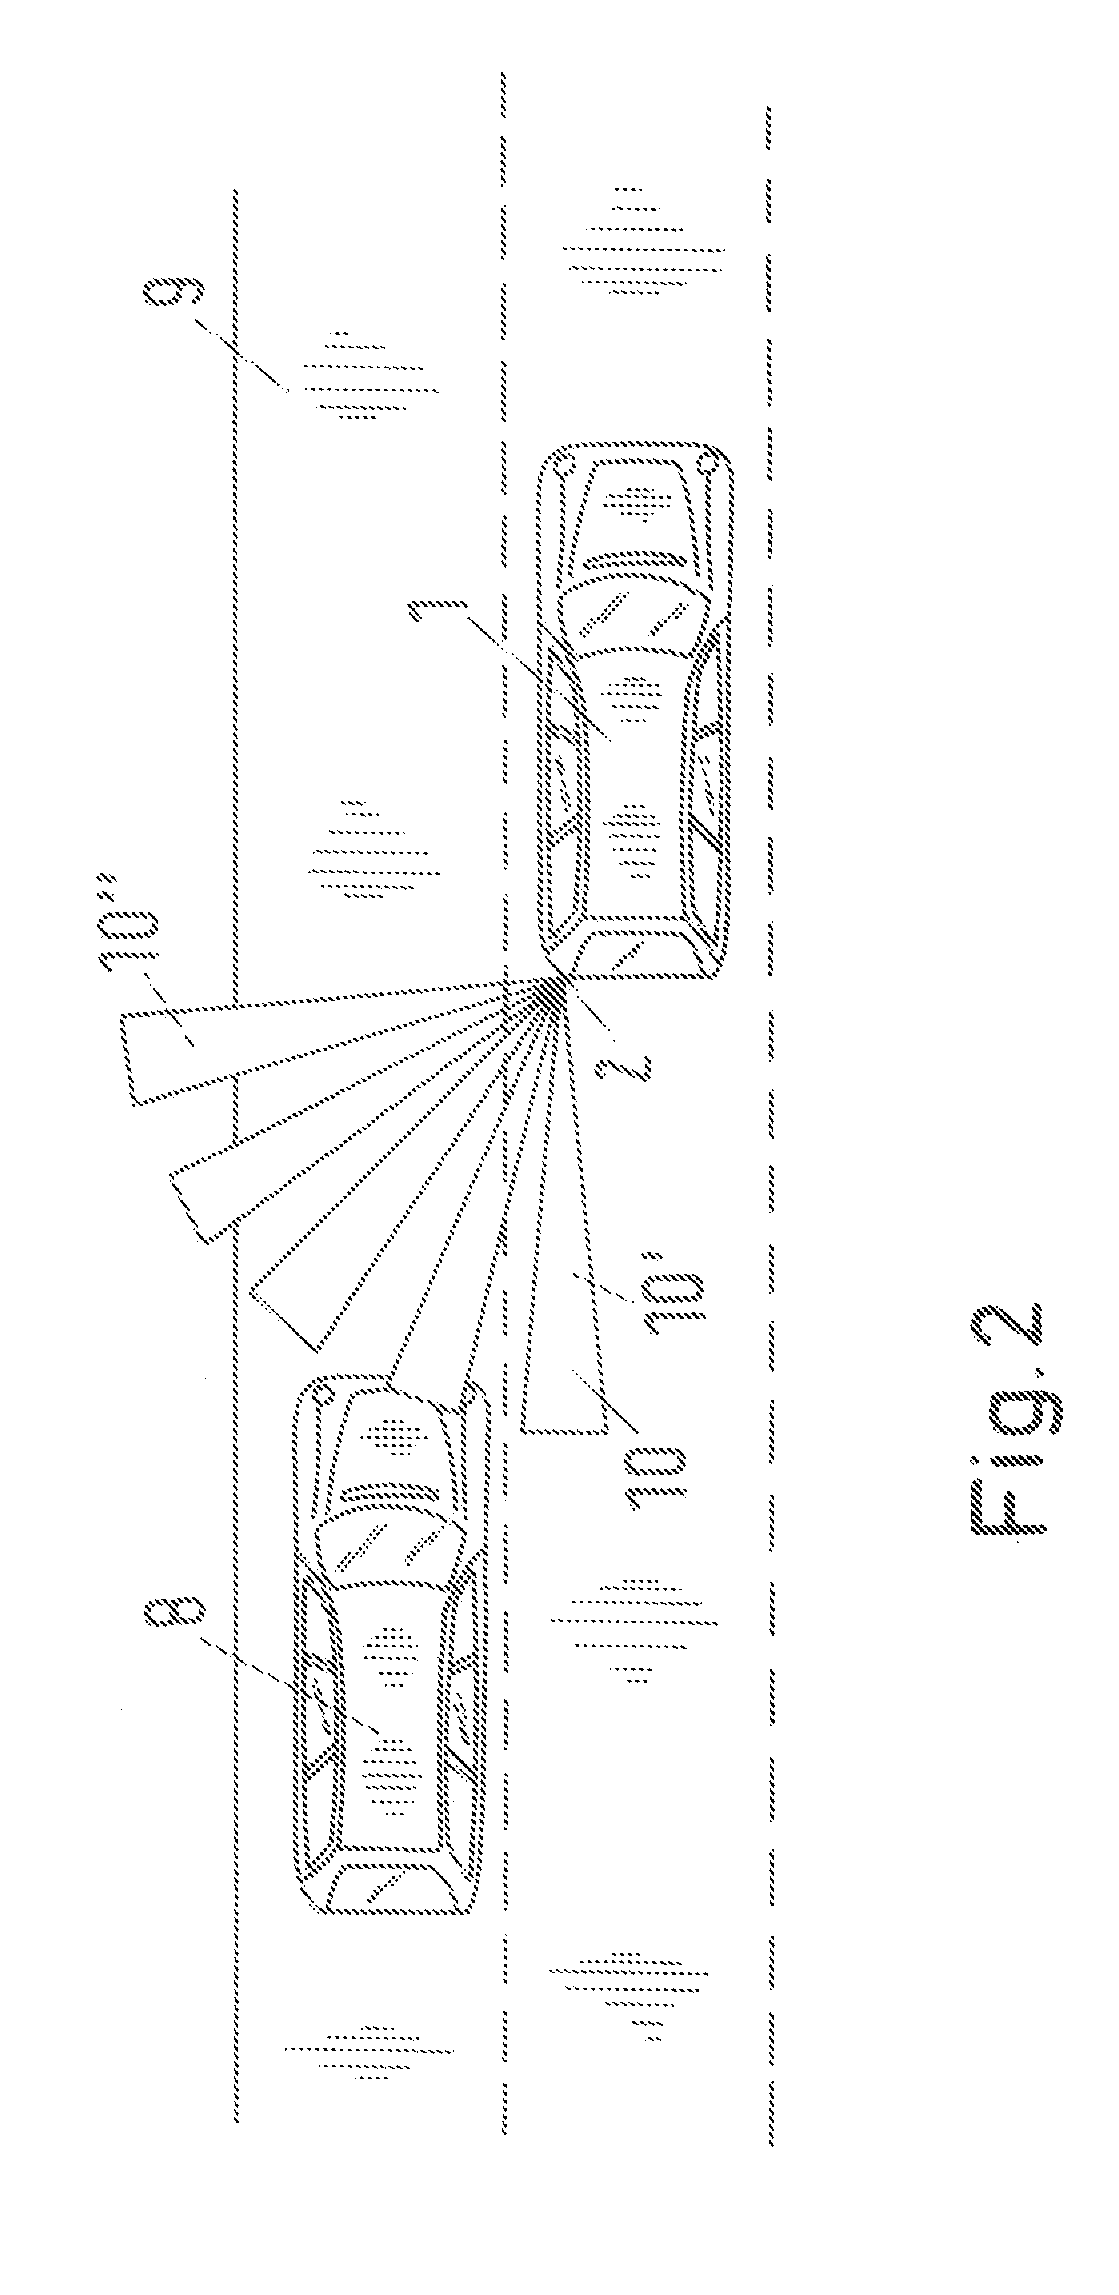 Tail light assembly for a motor vehicle